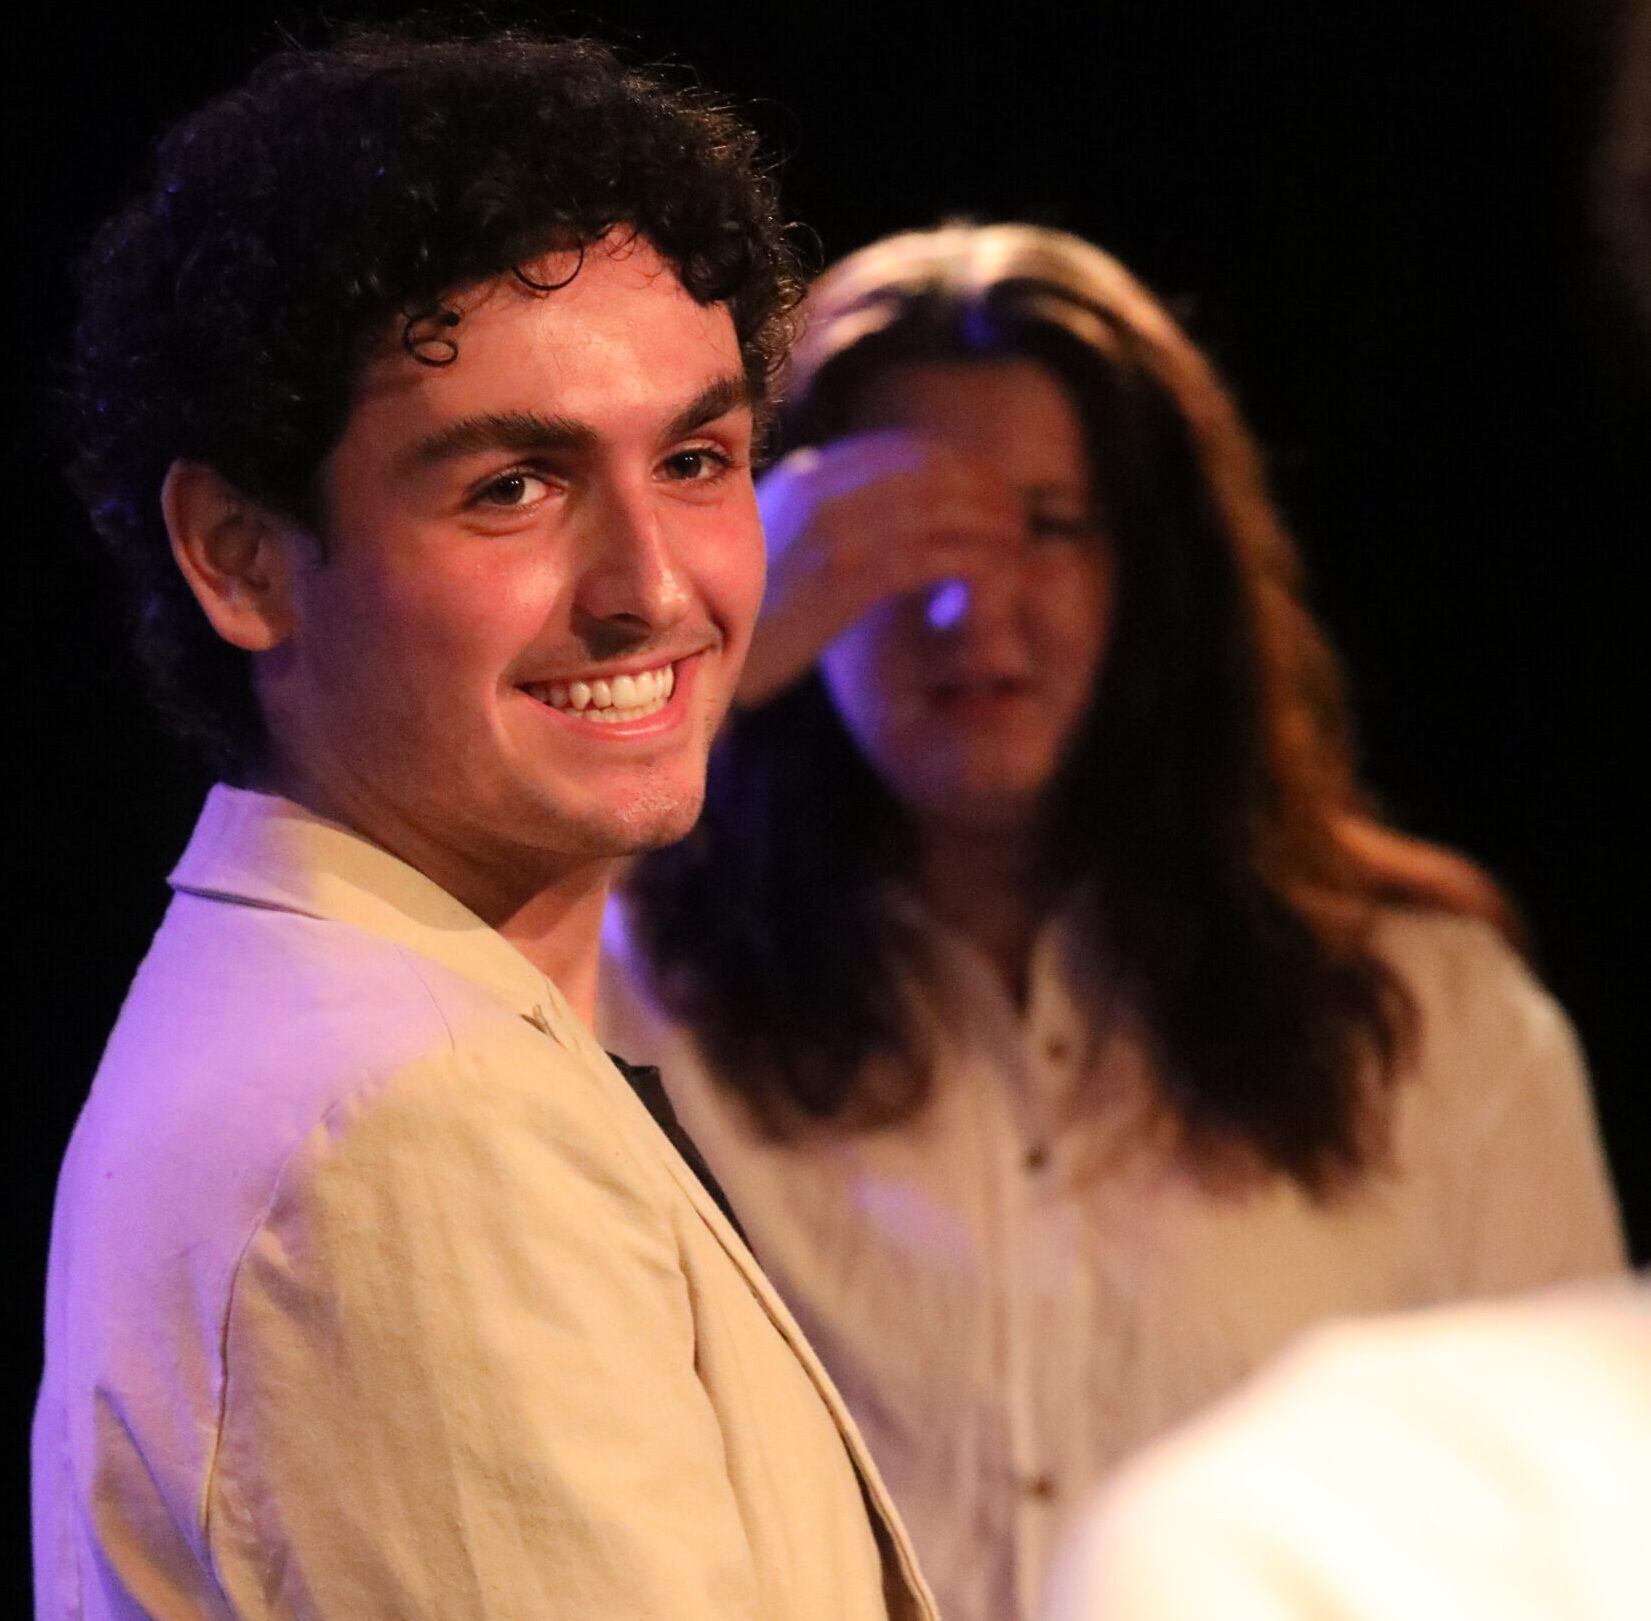 The author smiling with their cast during the curtain call of “A Midsummer Night’s Dream.”